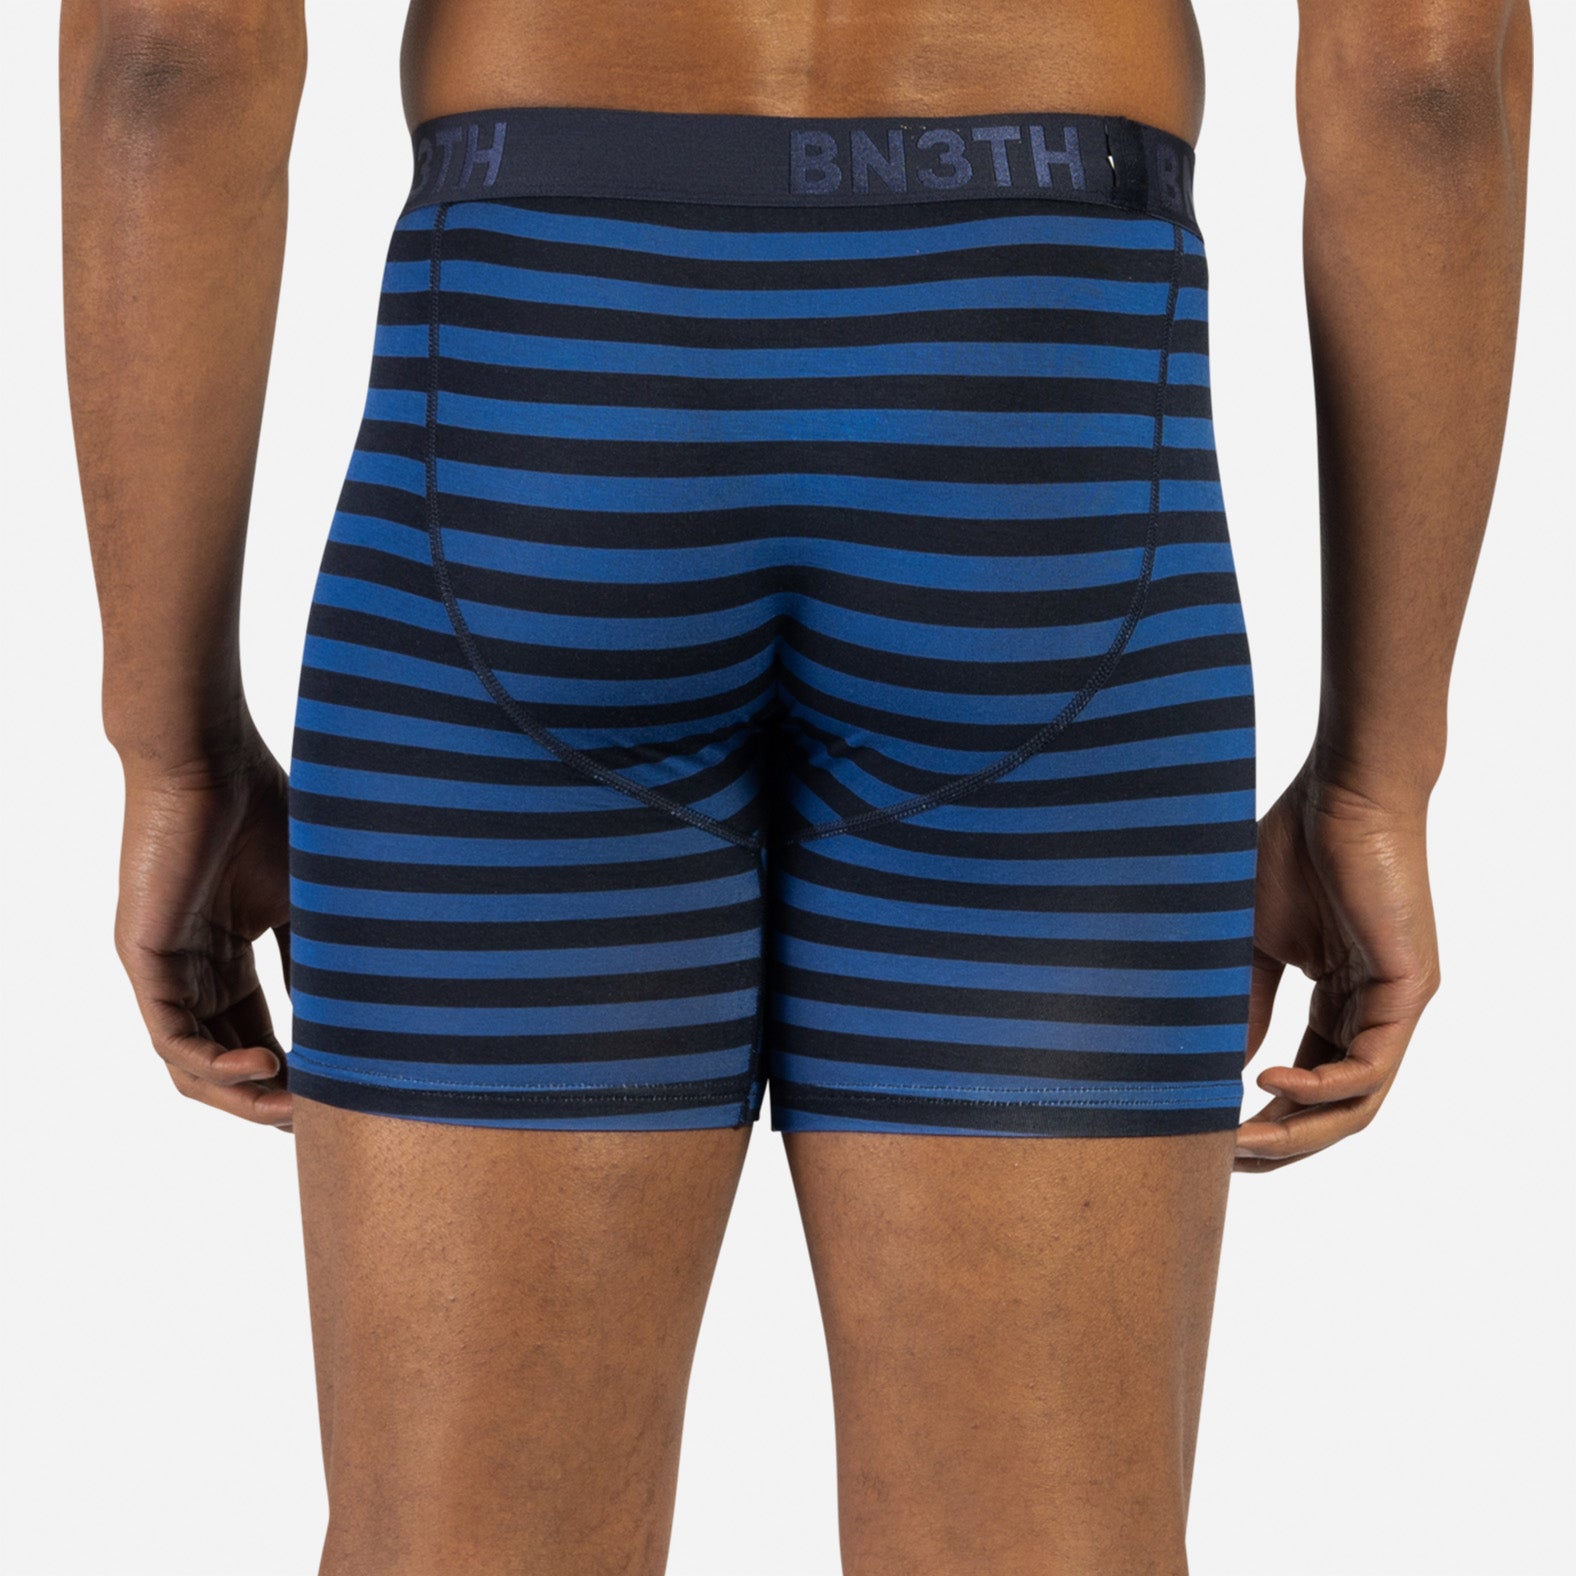 CLASSIC BOXER BRIEF WITH FLY: TRADITIONAL STRIPE QUARTZ